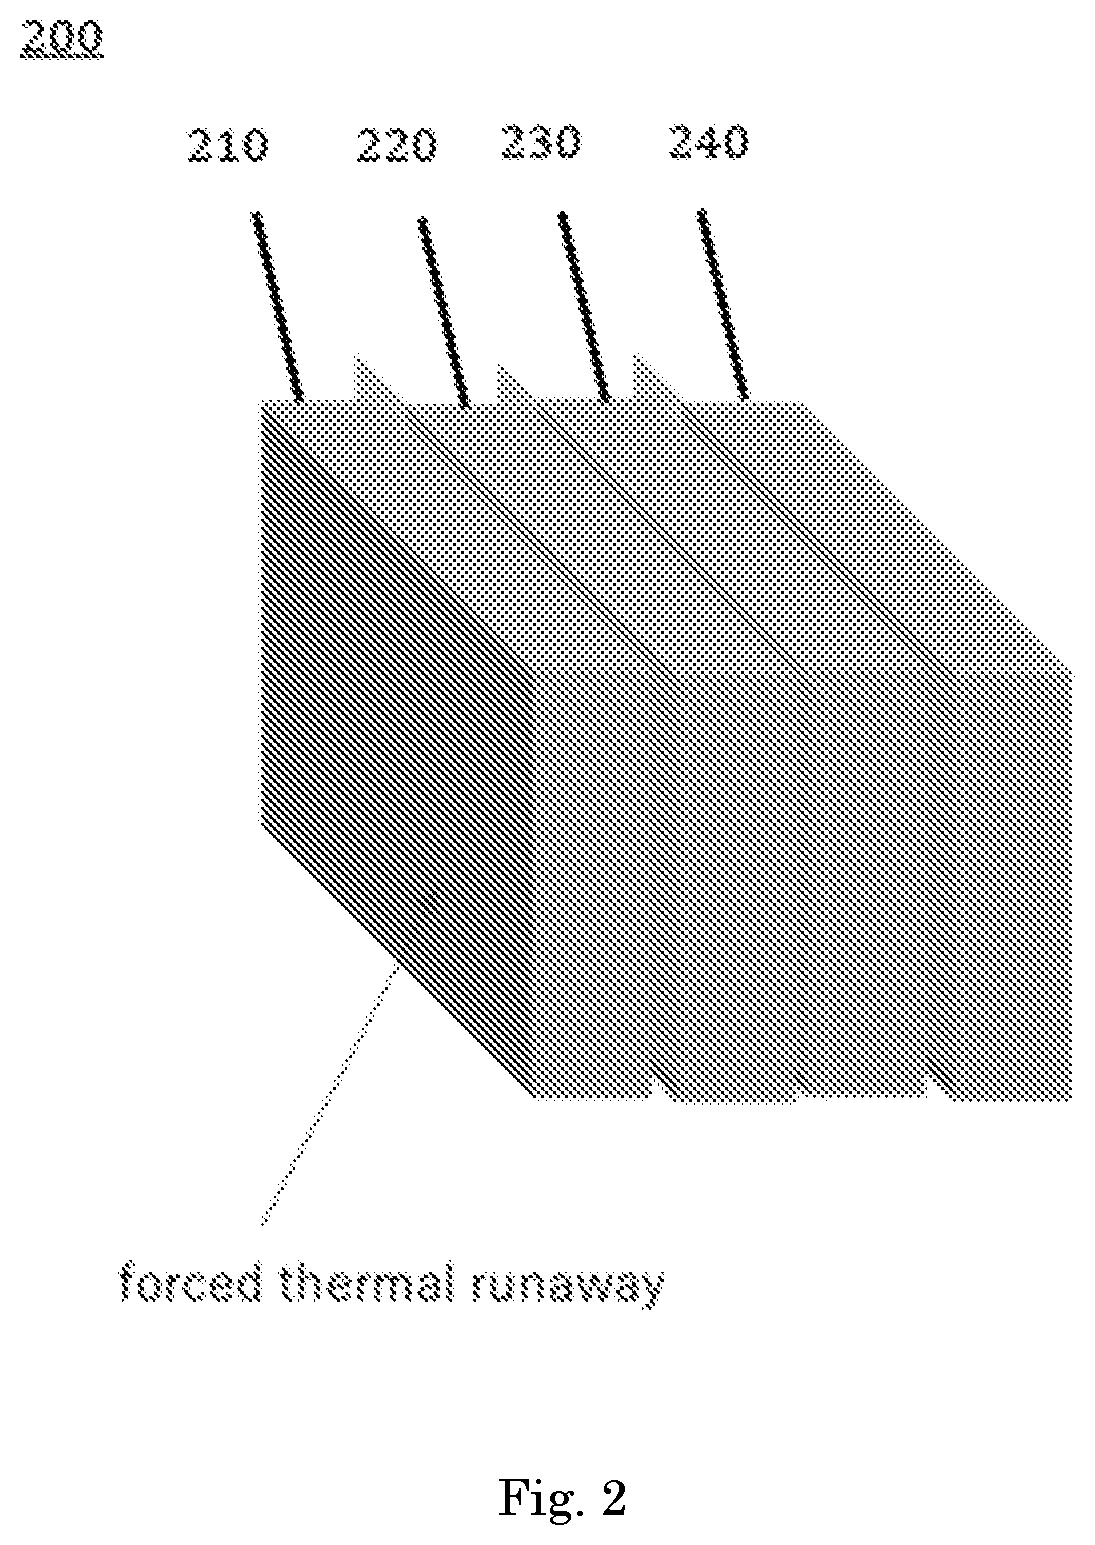 Composite thermal barrier materials